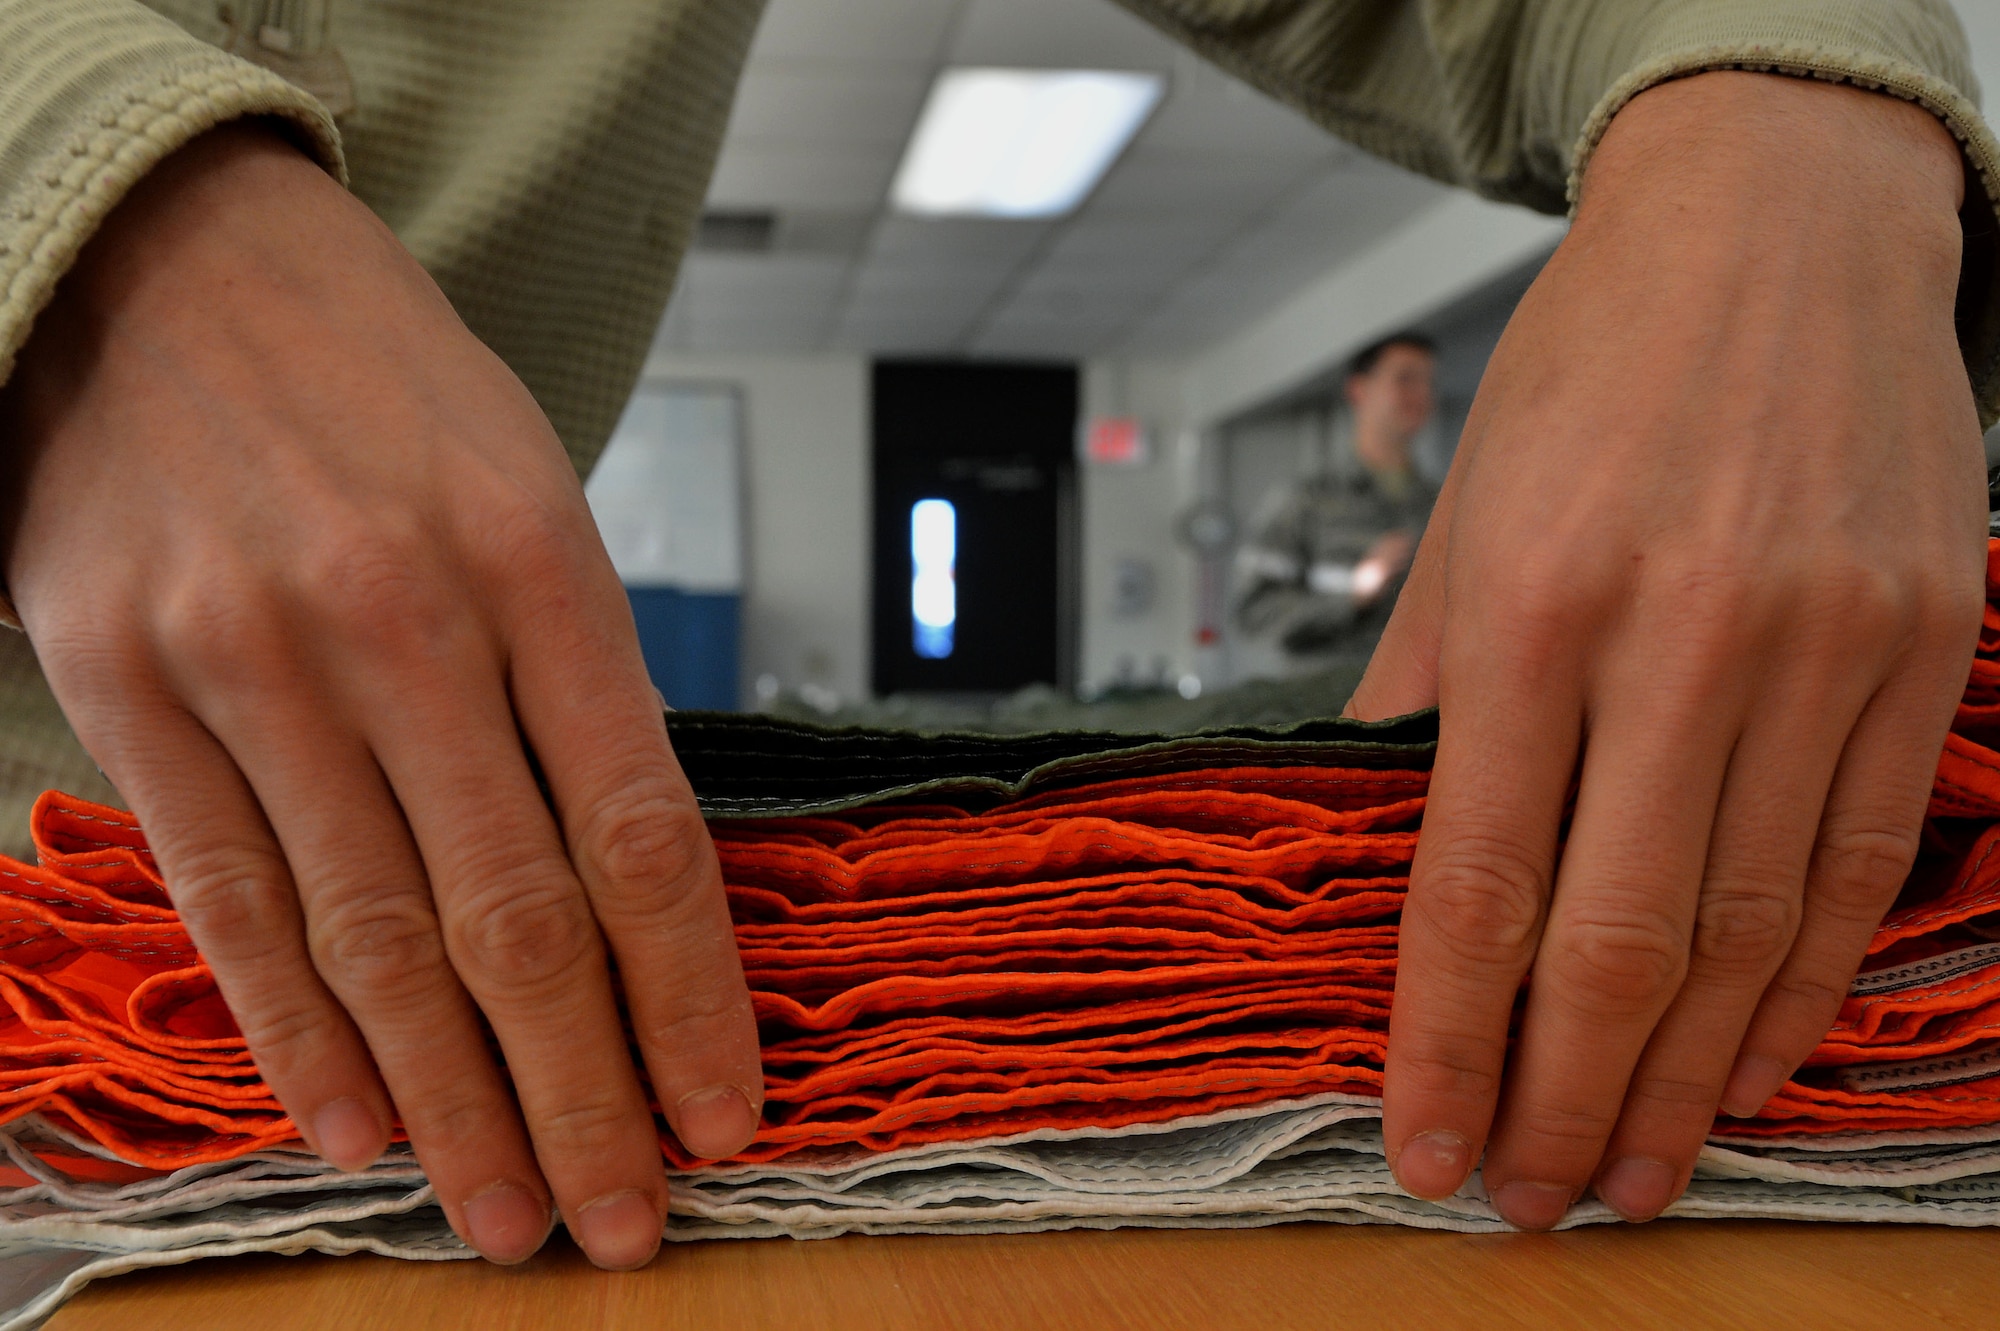 U.S. Air Force Airman 1st Class Kyle Denzine, 20th Operations Support Squadron aircrew flight equipment specialist, smooths out a parachute  at Shaw Air Force Base, S.C., Oct. 20, 2015. Before the parachute gets packed, AFE Airmen must inspect it to ensure it is free of tears and debris. (U.S. Air Force photo by Senior Airman Michael Cossaboom)